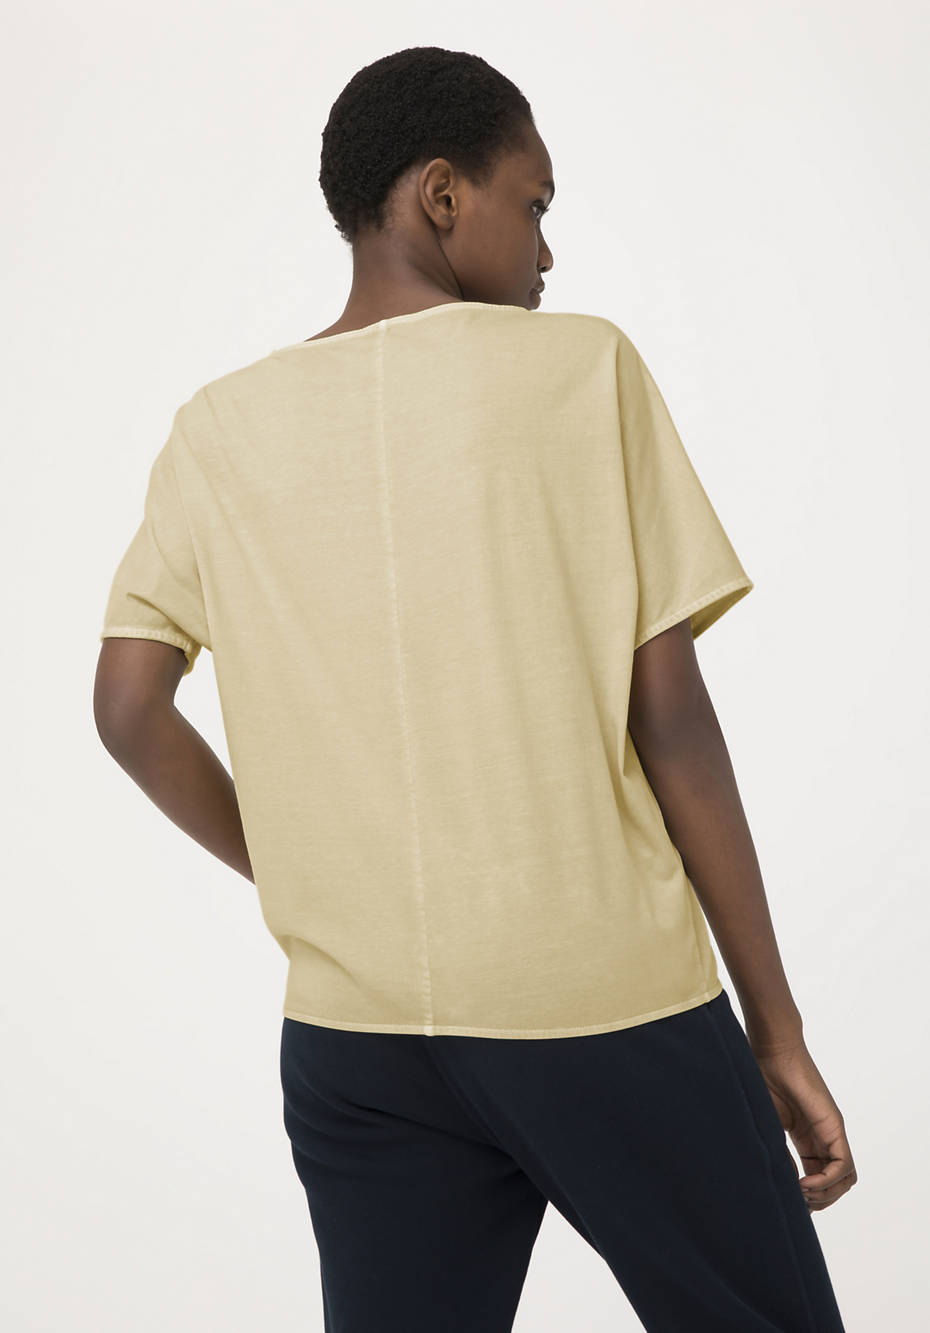 Shirt Mineral Dye made from pure organic cotton